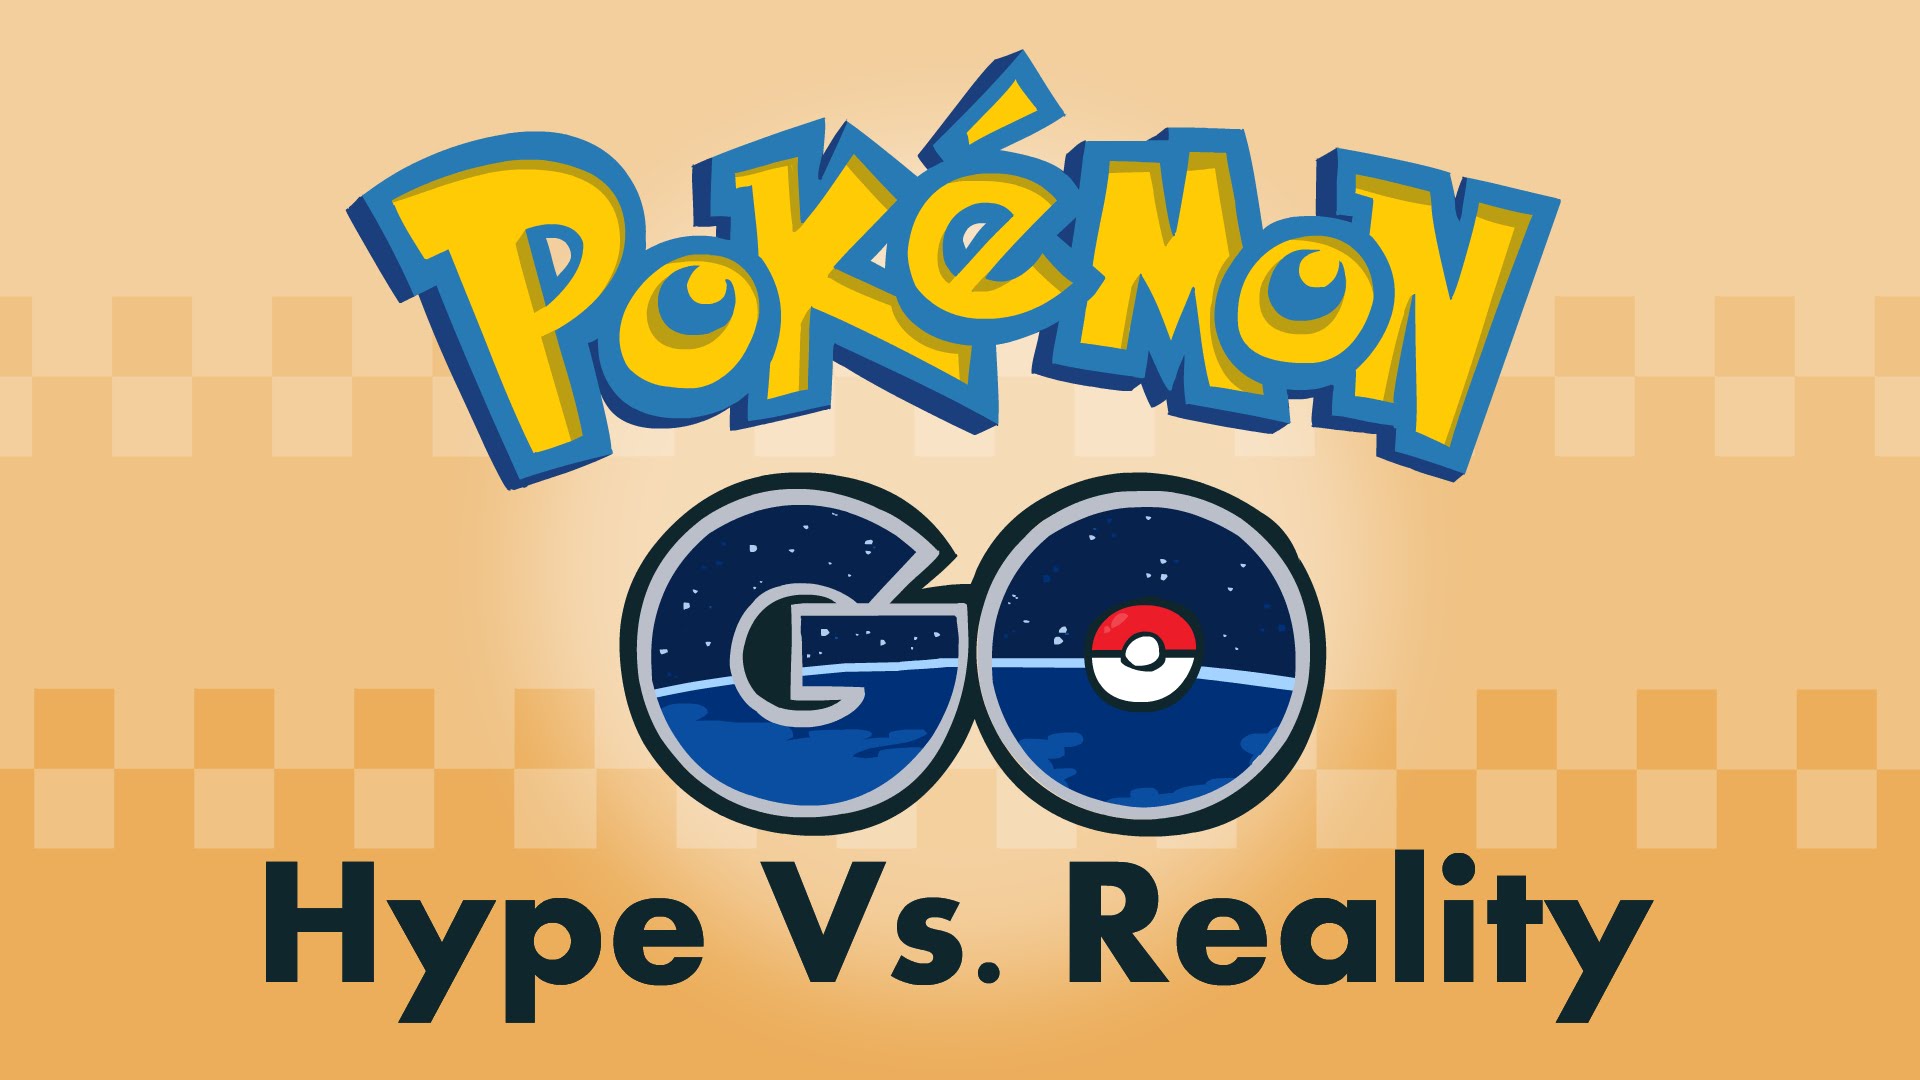 Pokémon Go Is Back in Nepal but Has the Hype Died Already? [Opinion]